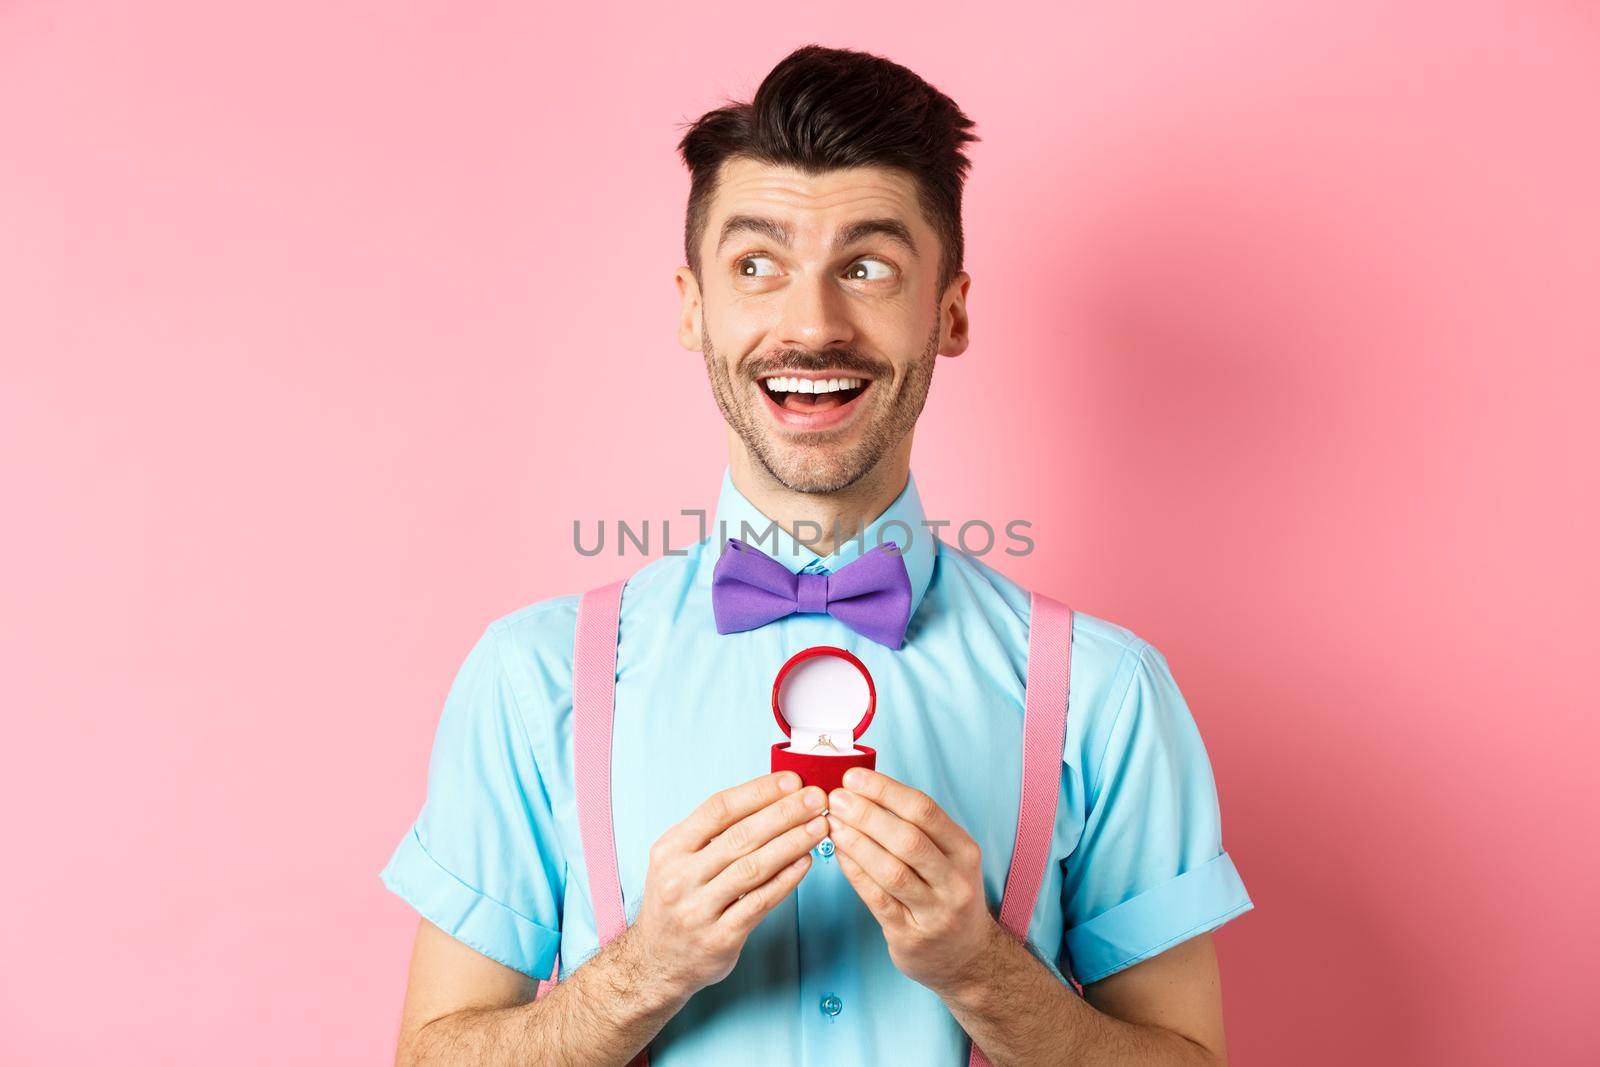 Valentines day. Romantic handsome man looking dreamy and smiling, showing engagement ring for his lover, standing happy over pink background.